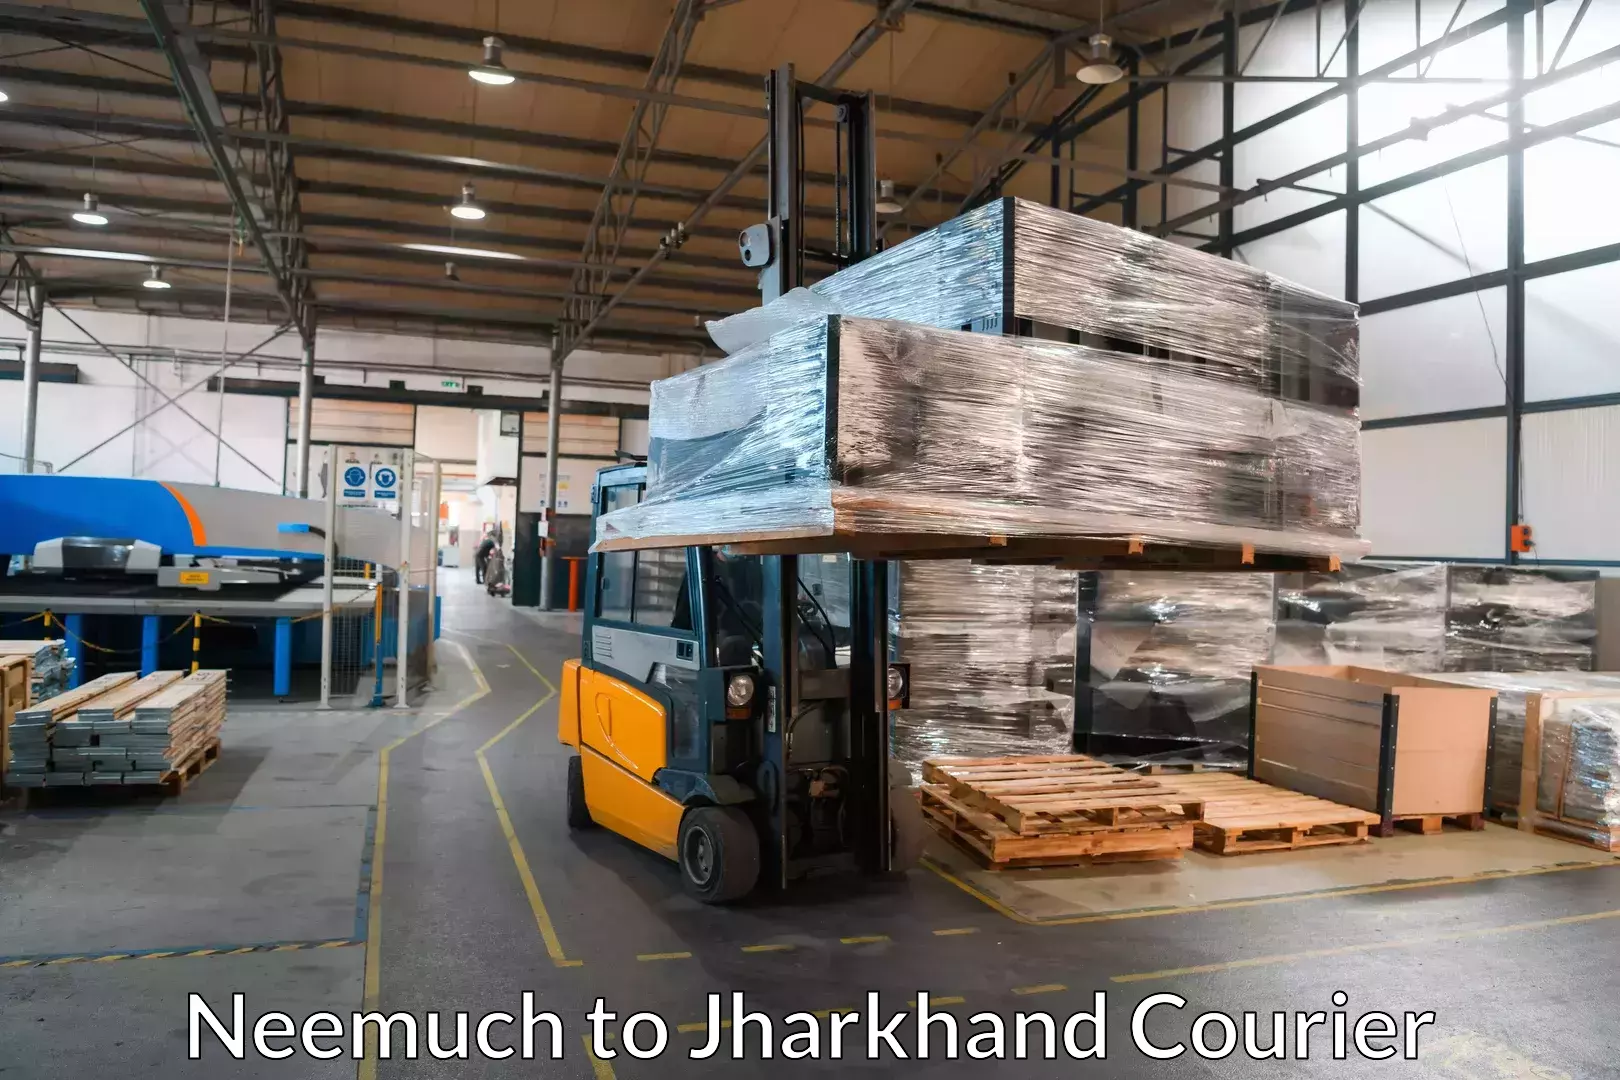 Furniture transport experts Neemuch to Jharkhand